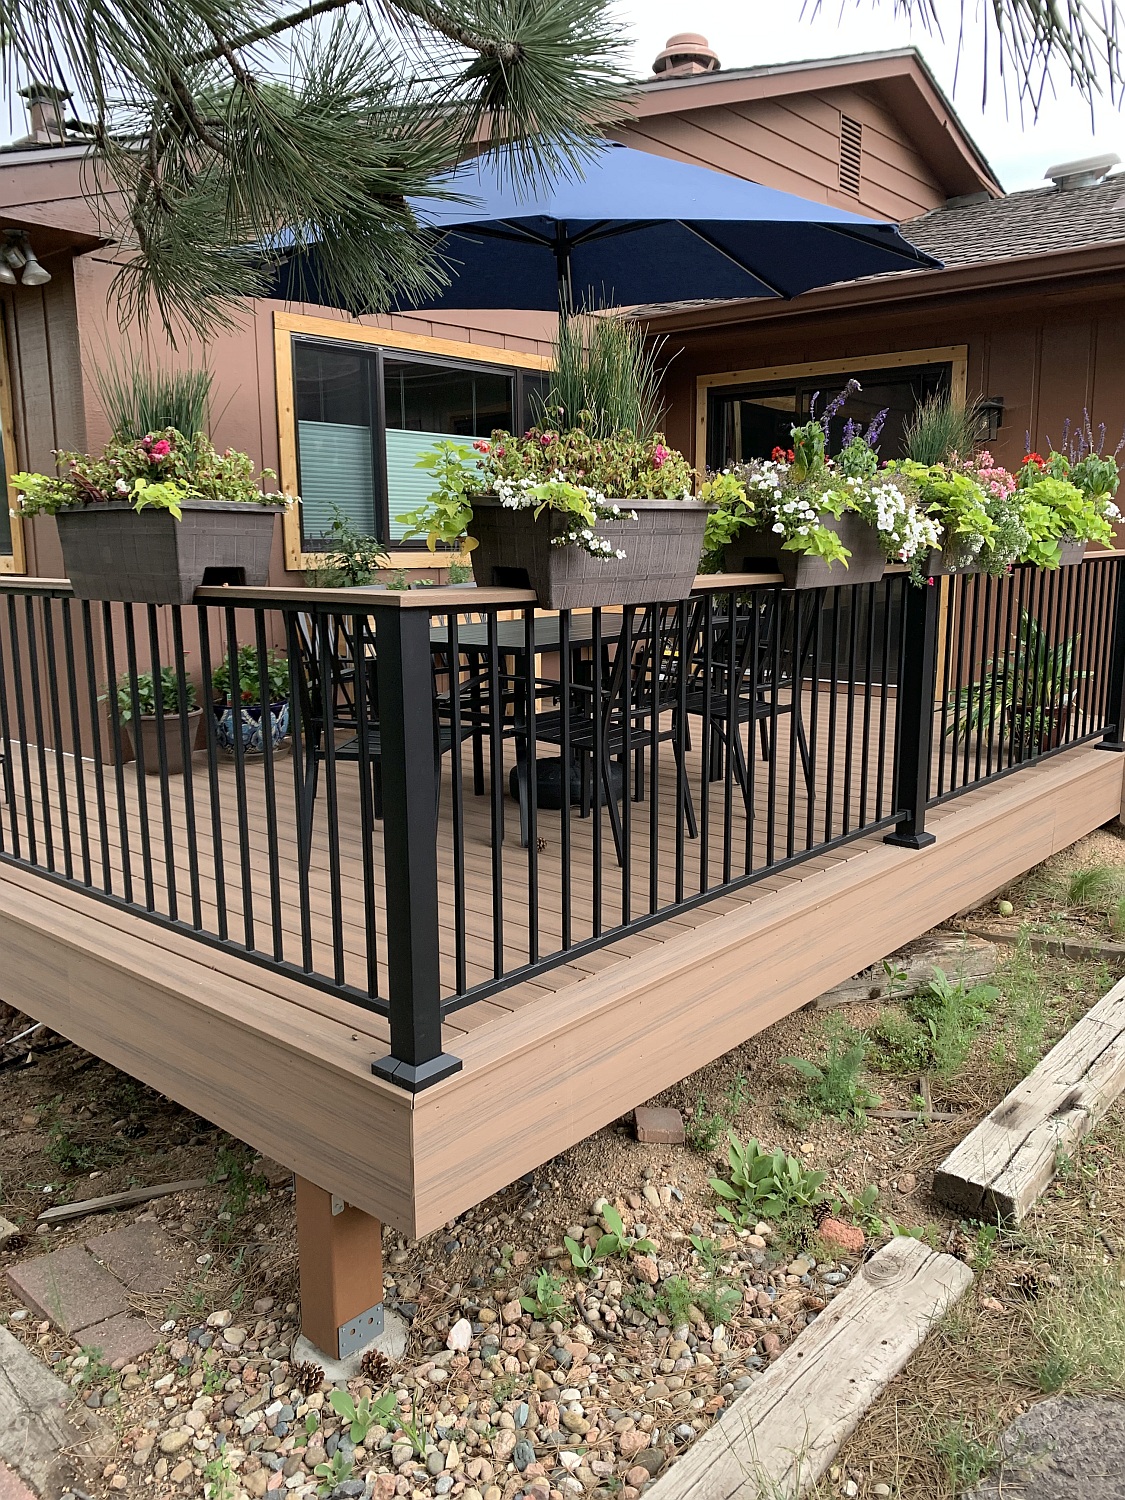 A gorgeous outdoor living space created with a composite deck. The homeowner has added a dining area and flower boxes along the railing.